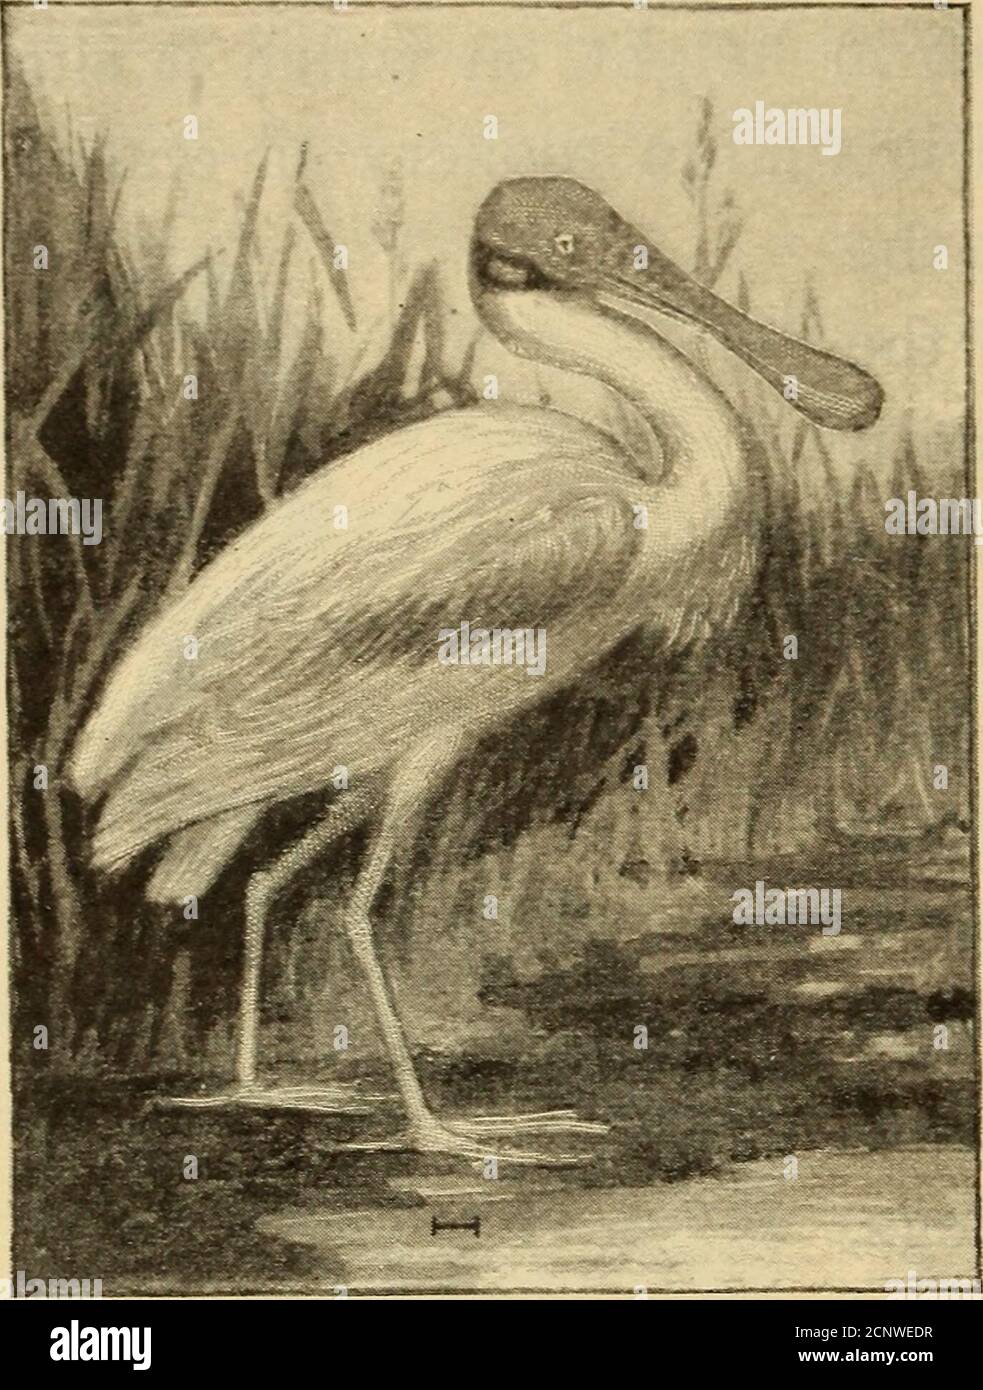 . Half hours with fishes, reptiles, and birds . Fig. 142. —Flamingo. 178 SOME WADING BIRDS (Fig. 143), a delicate, rose-colored bird, with a bill so broad-ened at the tip that it resembles a spoon. I have seen them standing on the reefalone or with the ibis (Fig.144). The latter, especiallythe scarlet ibis, is a beauti-ful bird of brilliant plum-age and really a native ofSouth America, thoughcommon in Florida. Theibis was a sacred bird inEgypt years ago, and itsmummy is often found in. Fig. 143.— Roseate Spoonbill. the ancient tombs. The bird isa familiar object along the Nileor on the Delta. Stock Photo